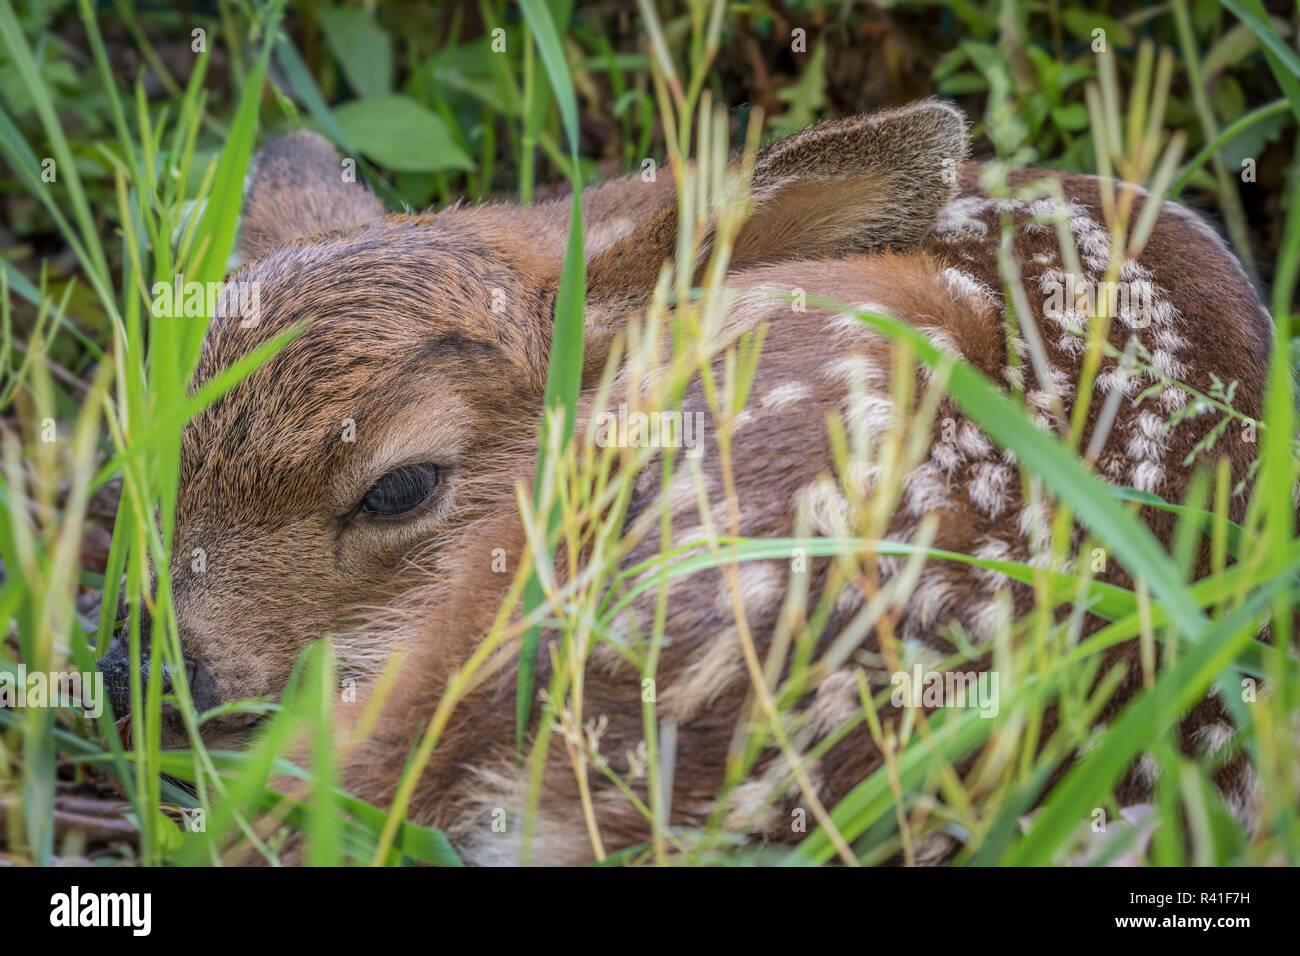 USA, Washington State, Seabeck. Baby black-tailed deer in grass. Stock Photo